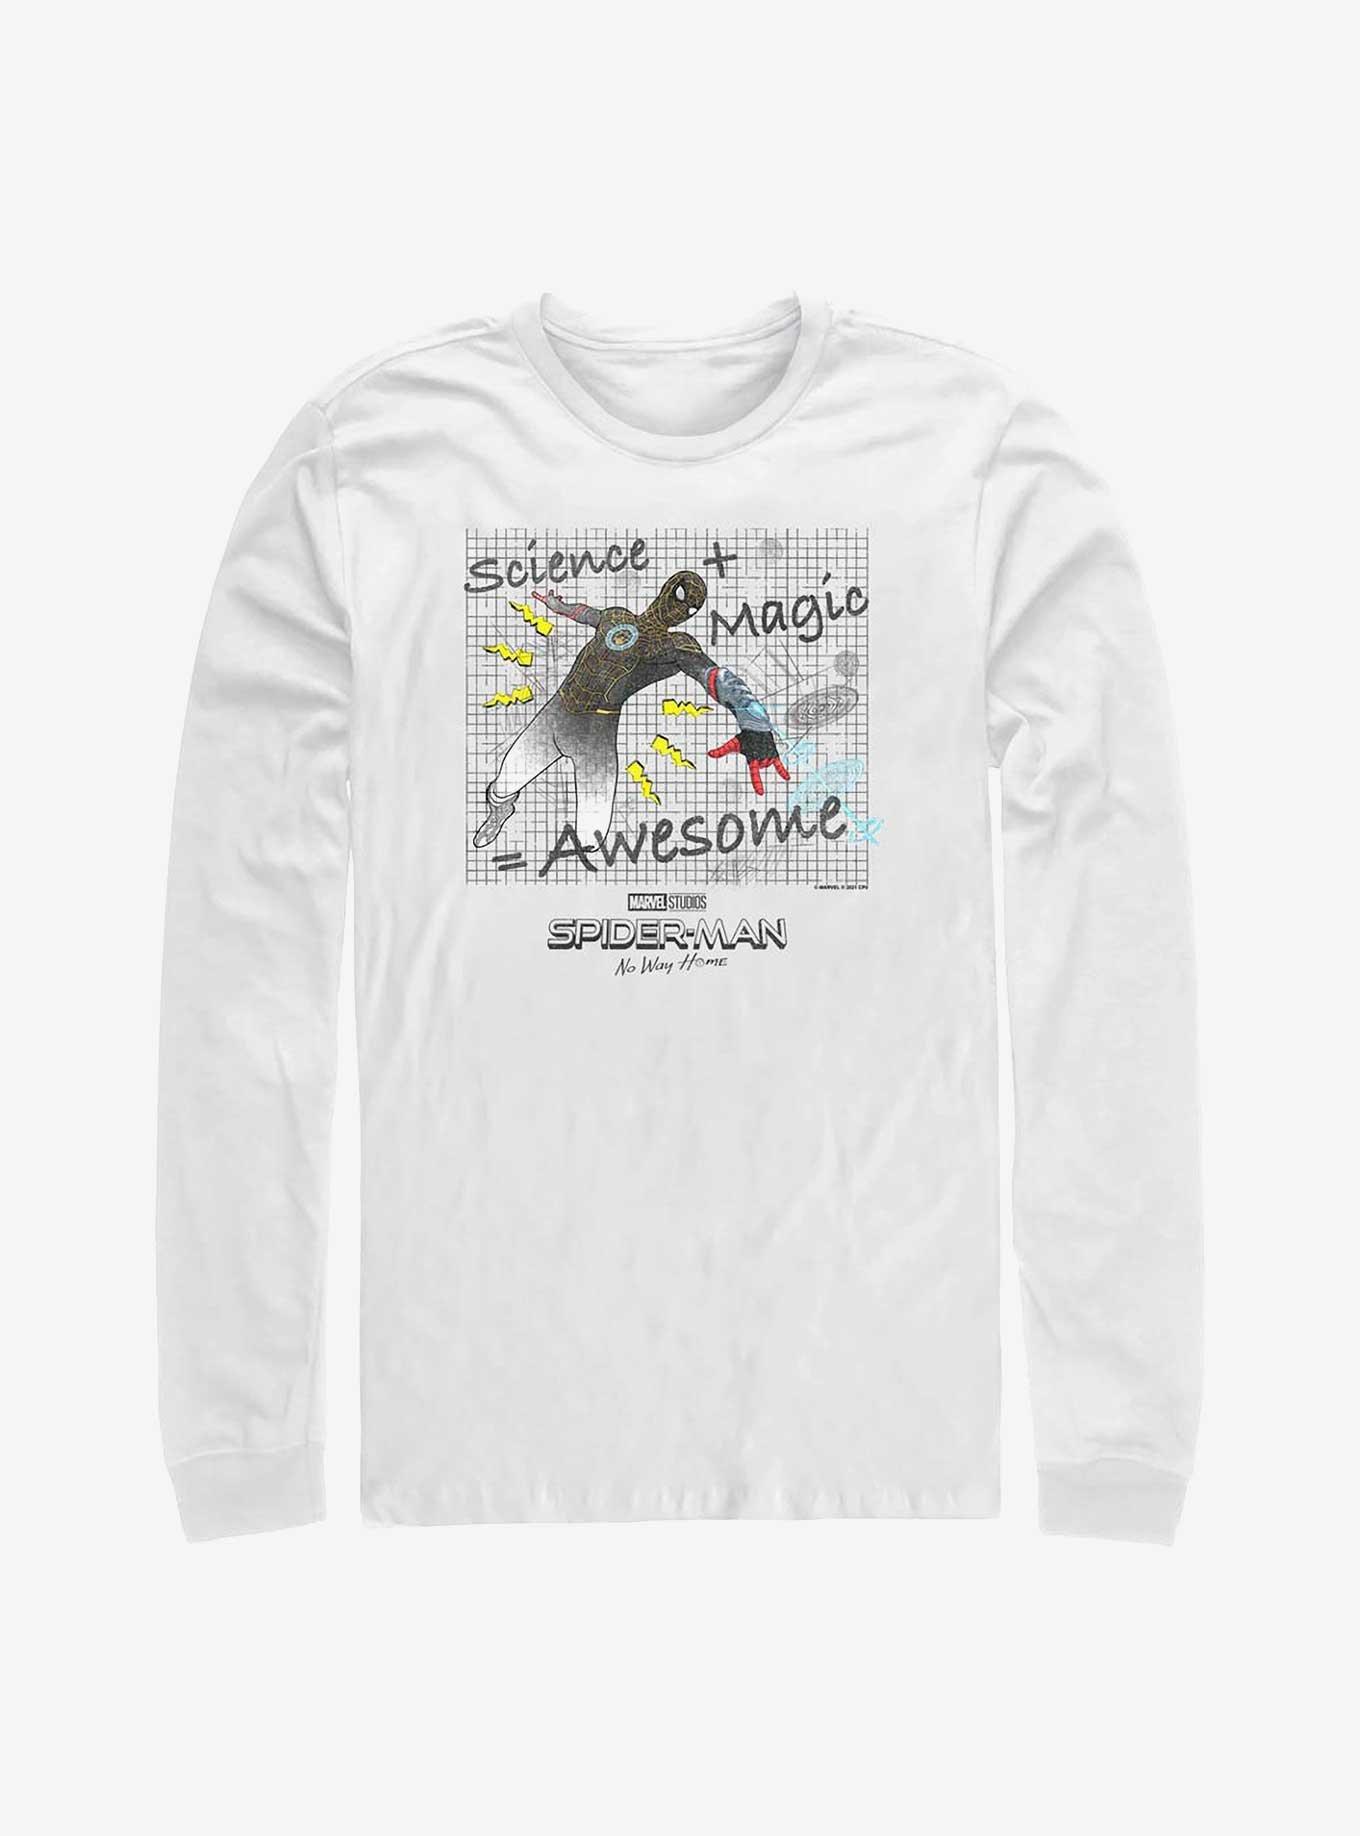 Marvel Spider-Man: No Way Home Science And Magic Long-Sleeve T-Shirt, WHITE, hi-res